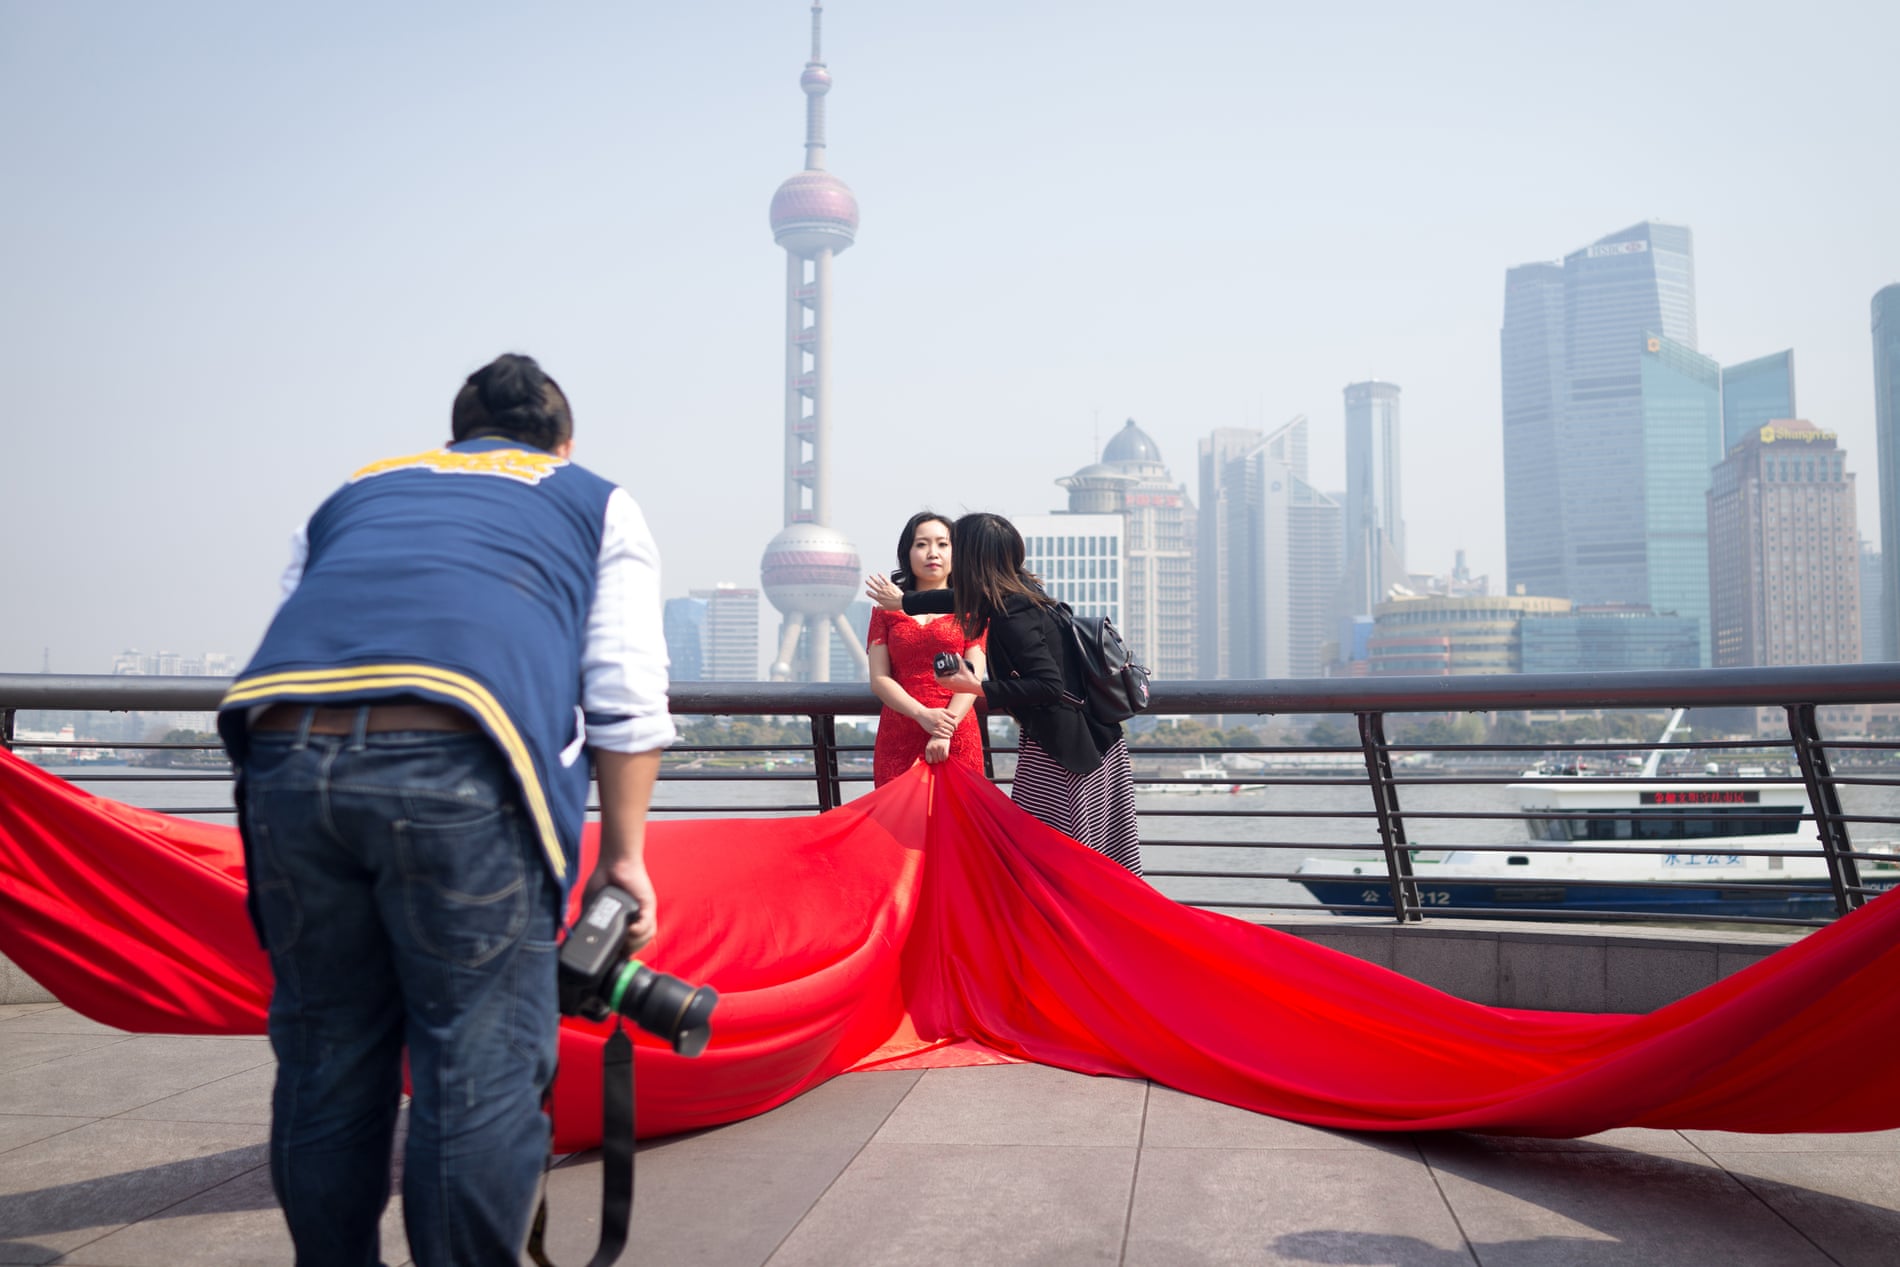 A warm spring morning in Shanghai on The Bund, where several pre-wedding shoots are happening simultaneously